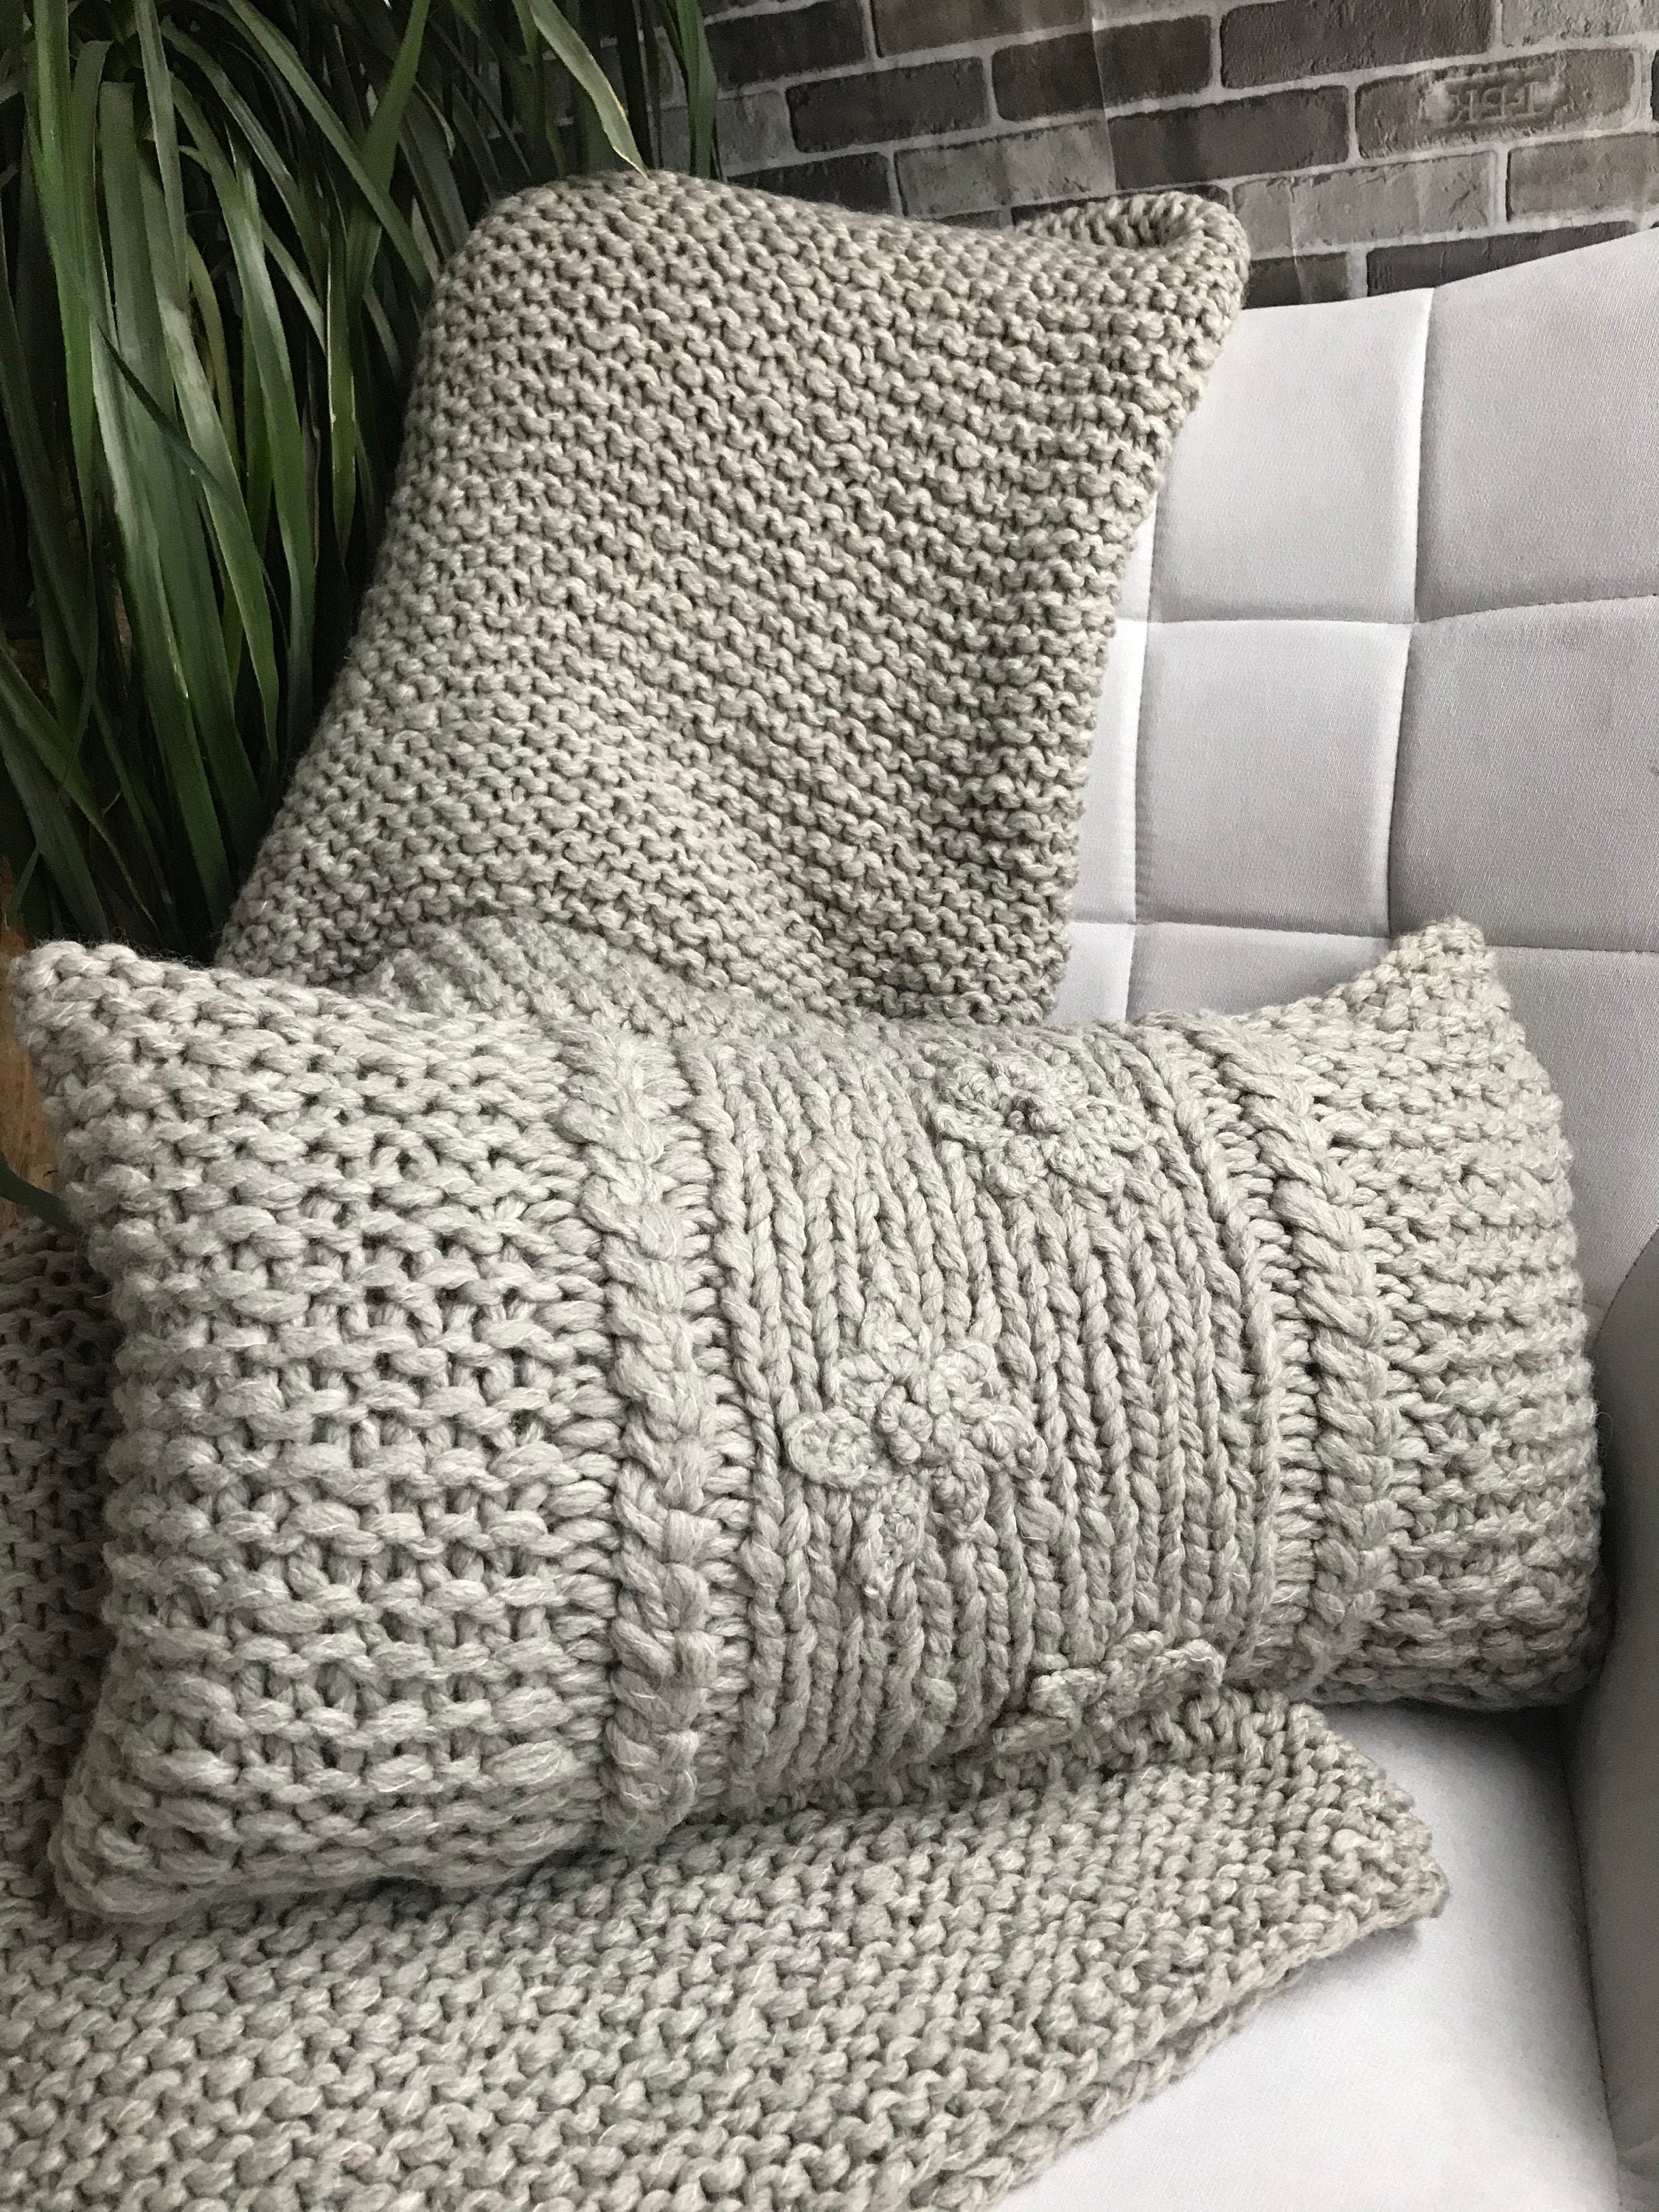 LiBcmlian White Knitted Throw Pillow Covers 20x20 Set of 2 Cotton Pillow  Cushion Cases Cable Knit Decoration Square Pillowcases for Couch Sofa  Bedroom